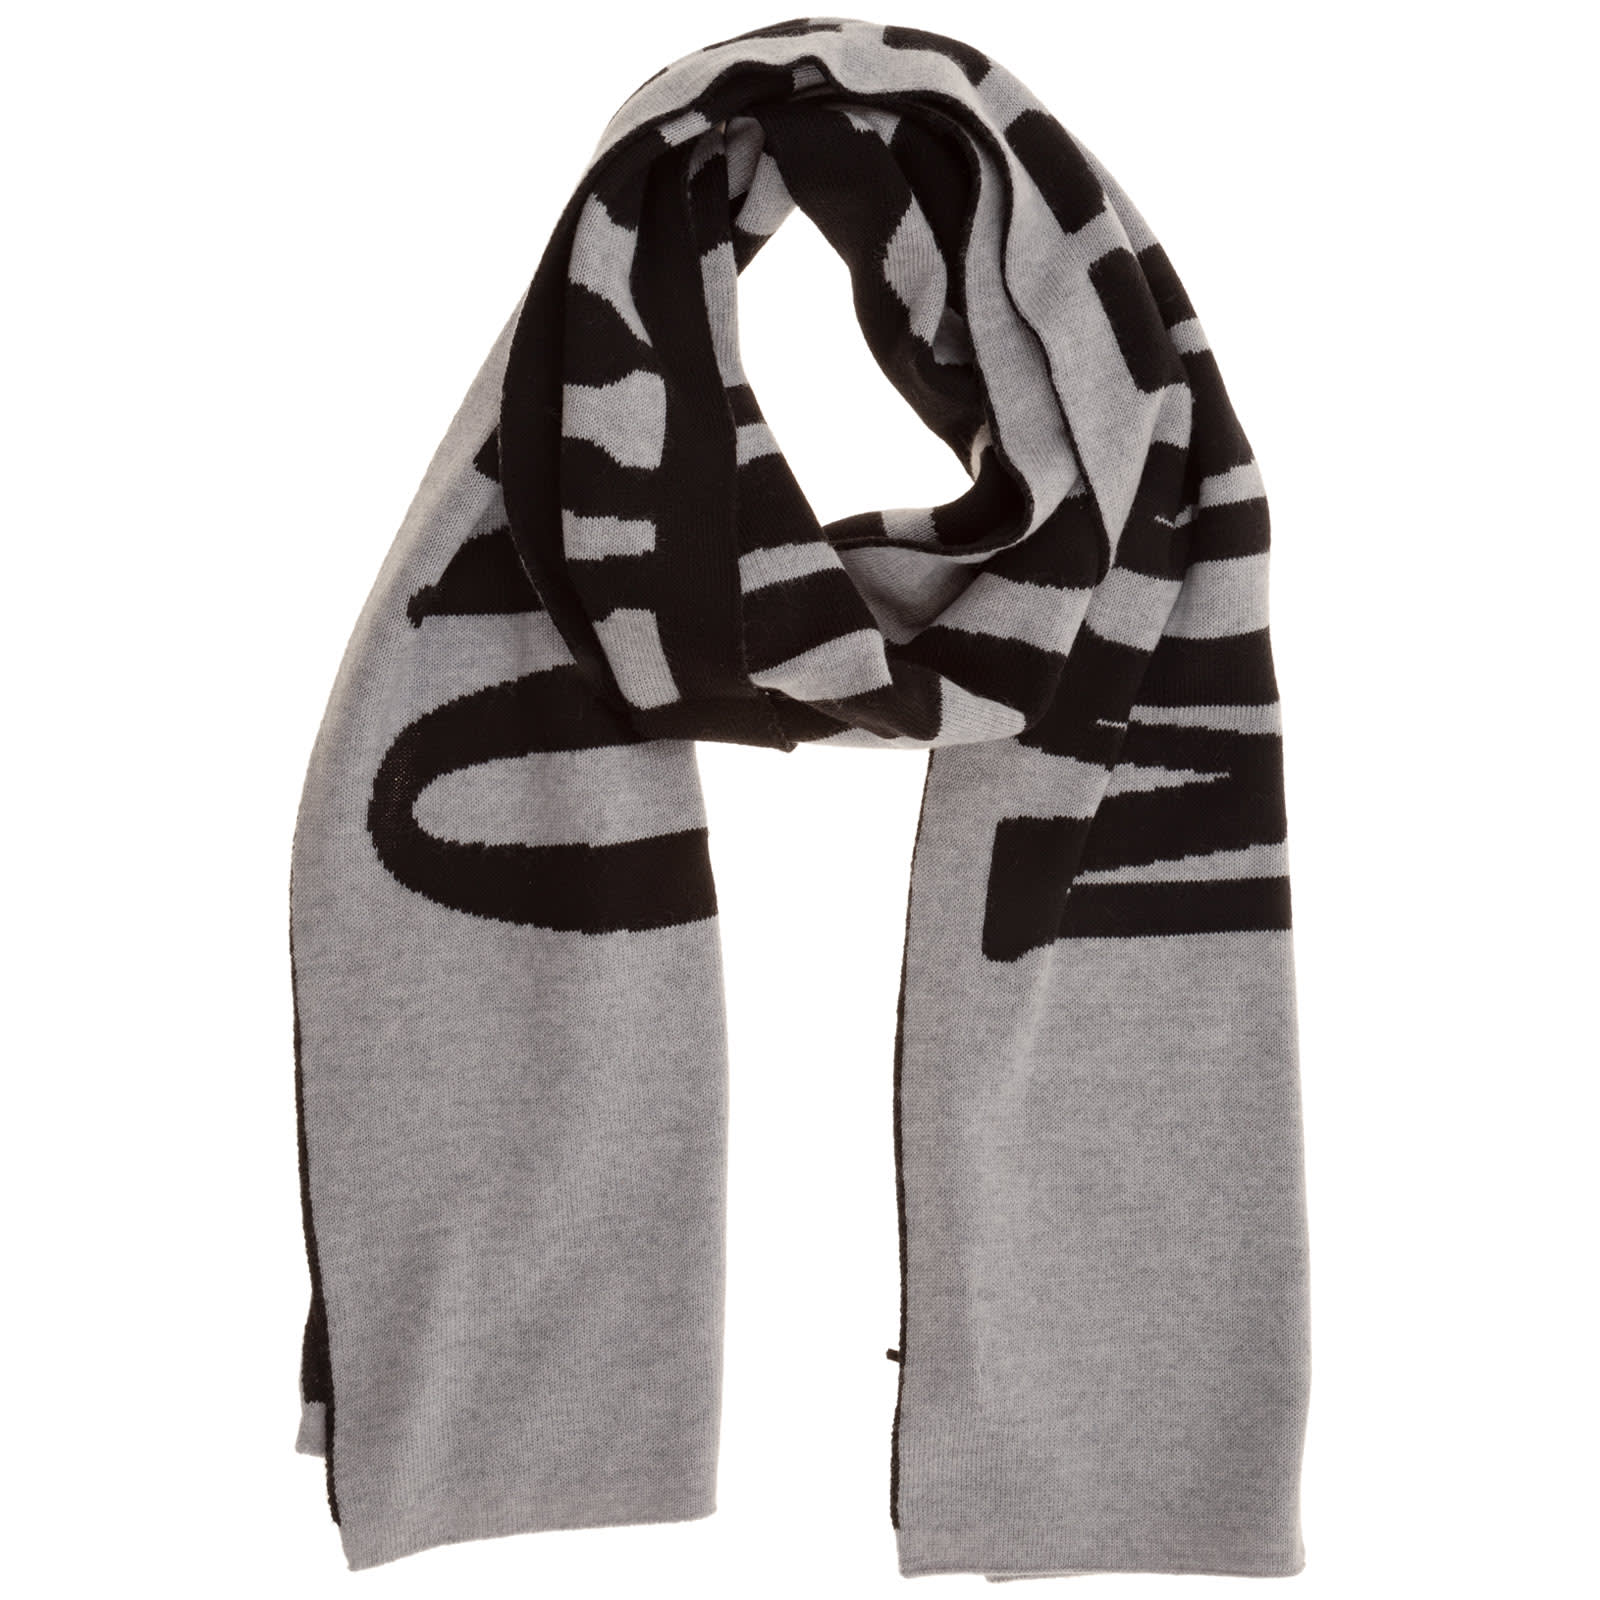 MOSCHINO DOUBLE QUESTION MARK WOOL SCARF,M524850125014